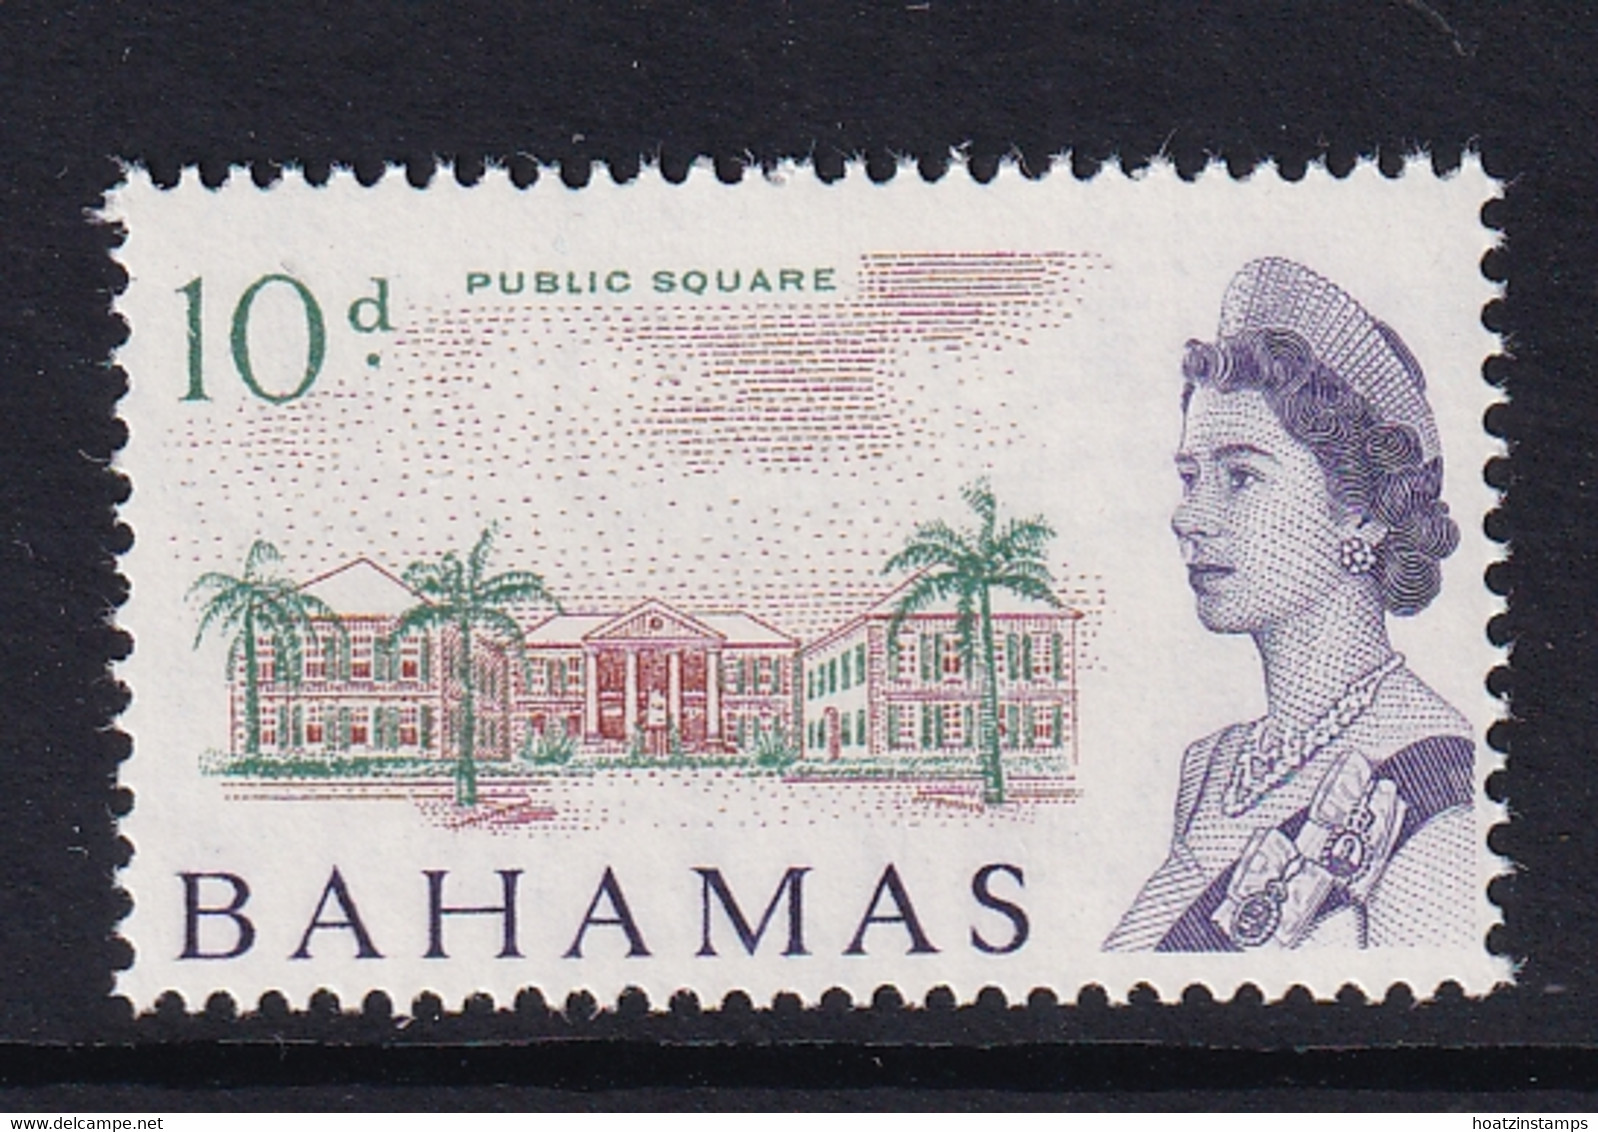 Bahamas: 1965   QE II - Pictorial    SG255   10d    MNH - 1963-1973 Ministerial Government